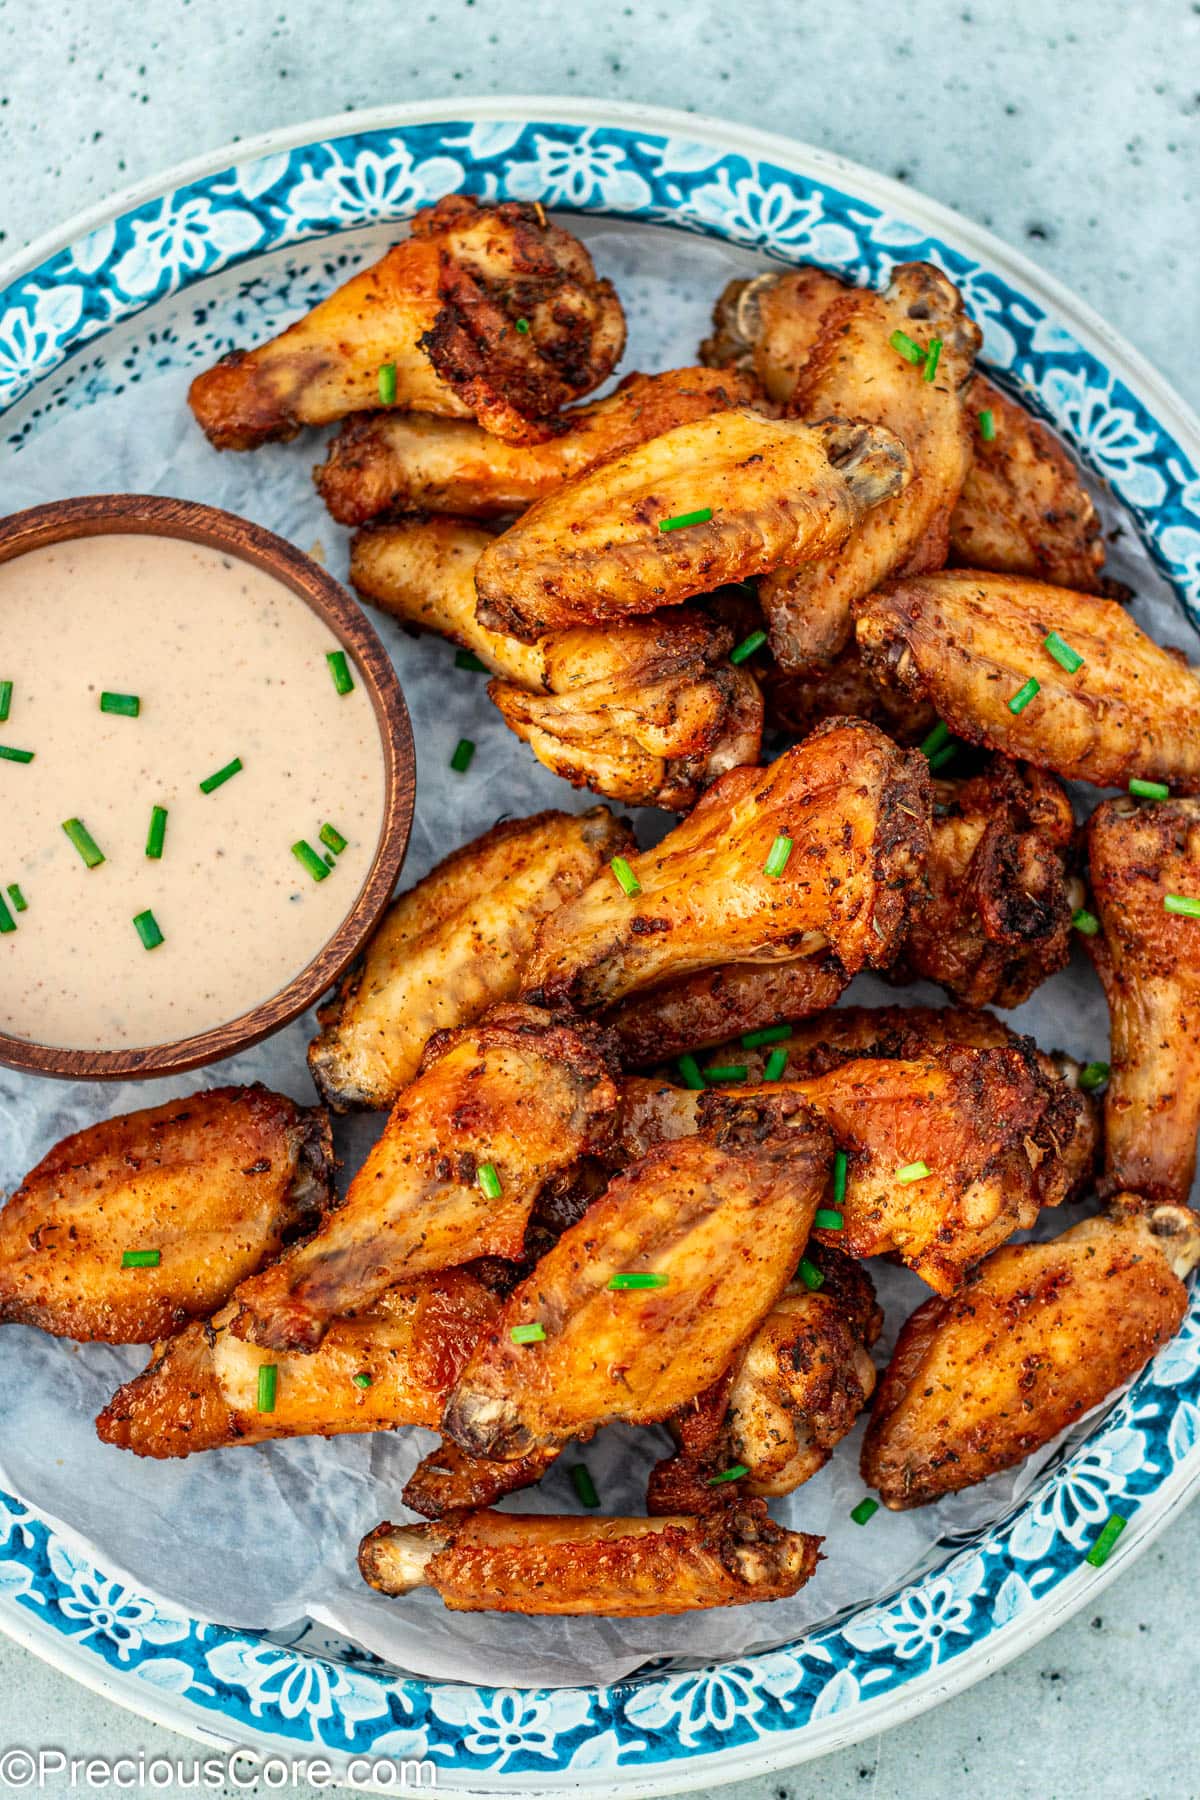 Baked Dry Rub Chicken Wings served with ranch.